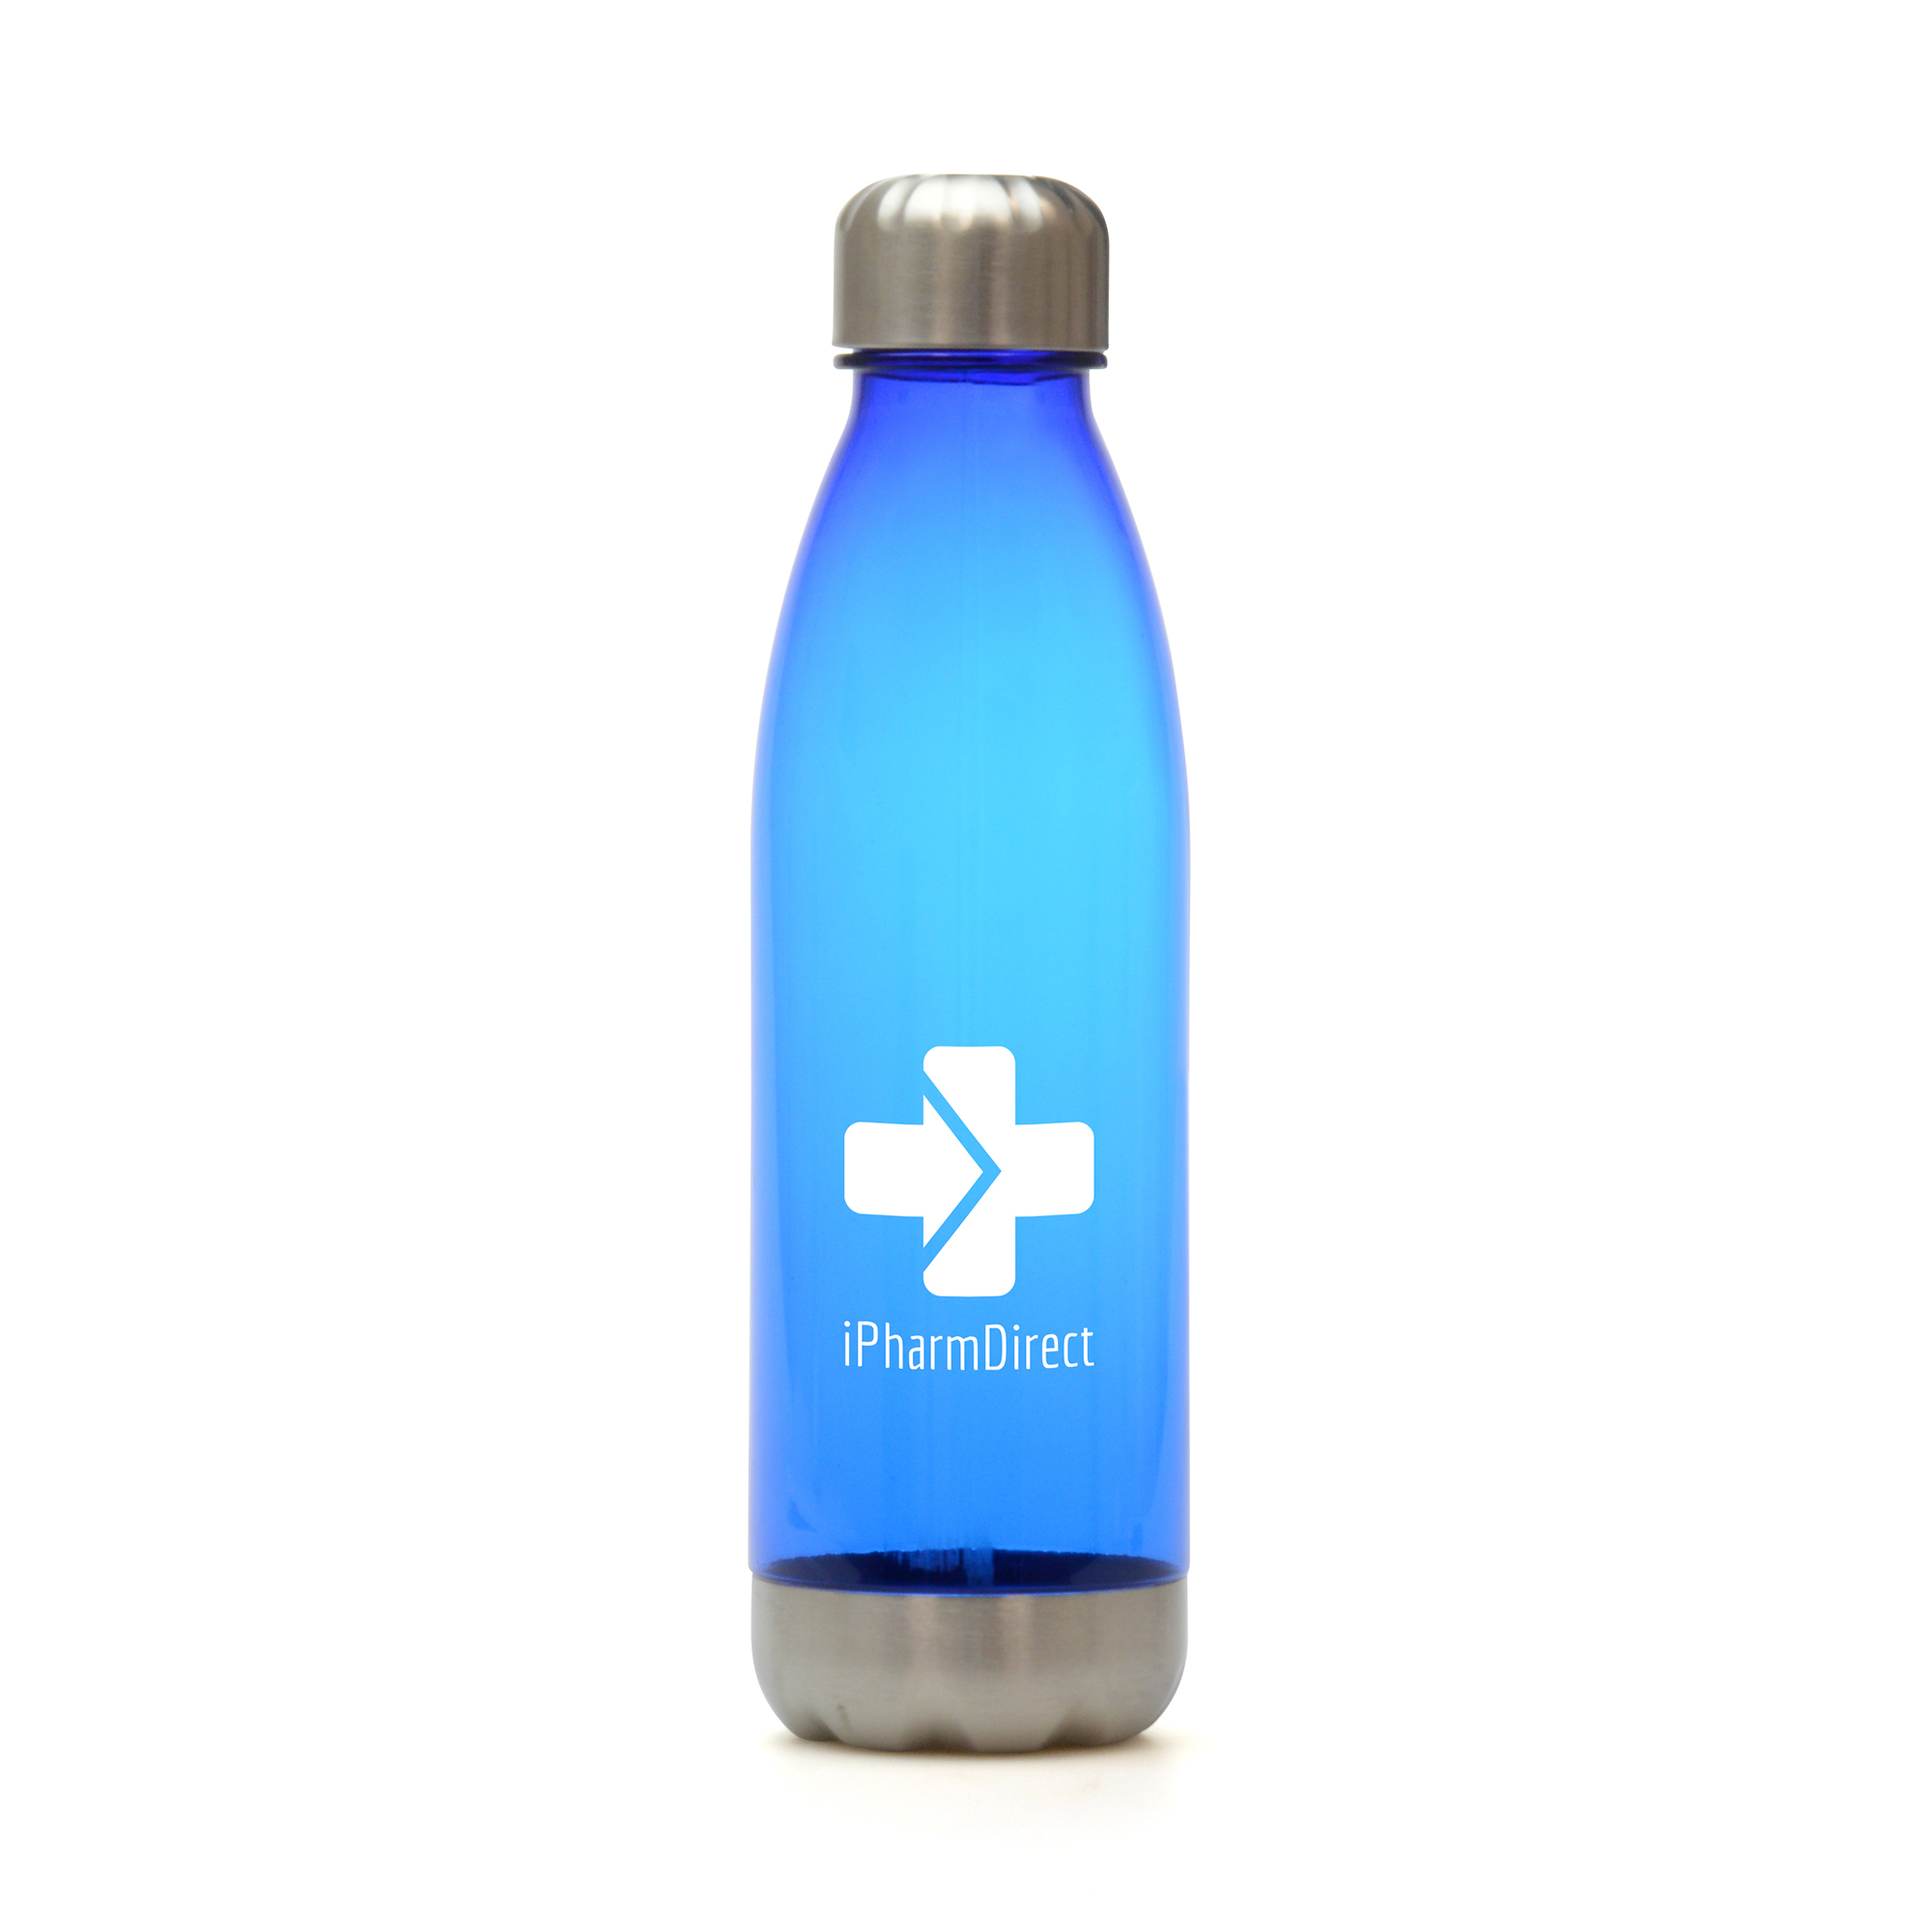 650ml single walled bottle made from 98% recycled materials. GRS certified recycled PET plastic bottle with RSC certified recycled stainless steel base and screw top lid. Lid contains GRS certified recycled PP plastic lining and silicone seal. BPA & PVC free. This product replaces MG0133 & is now made from PET material.